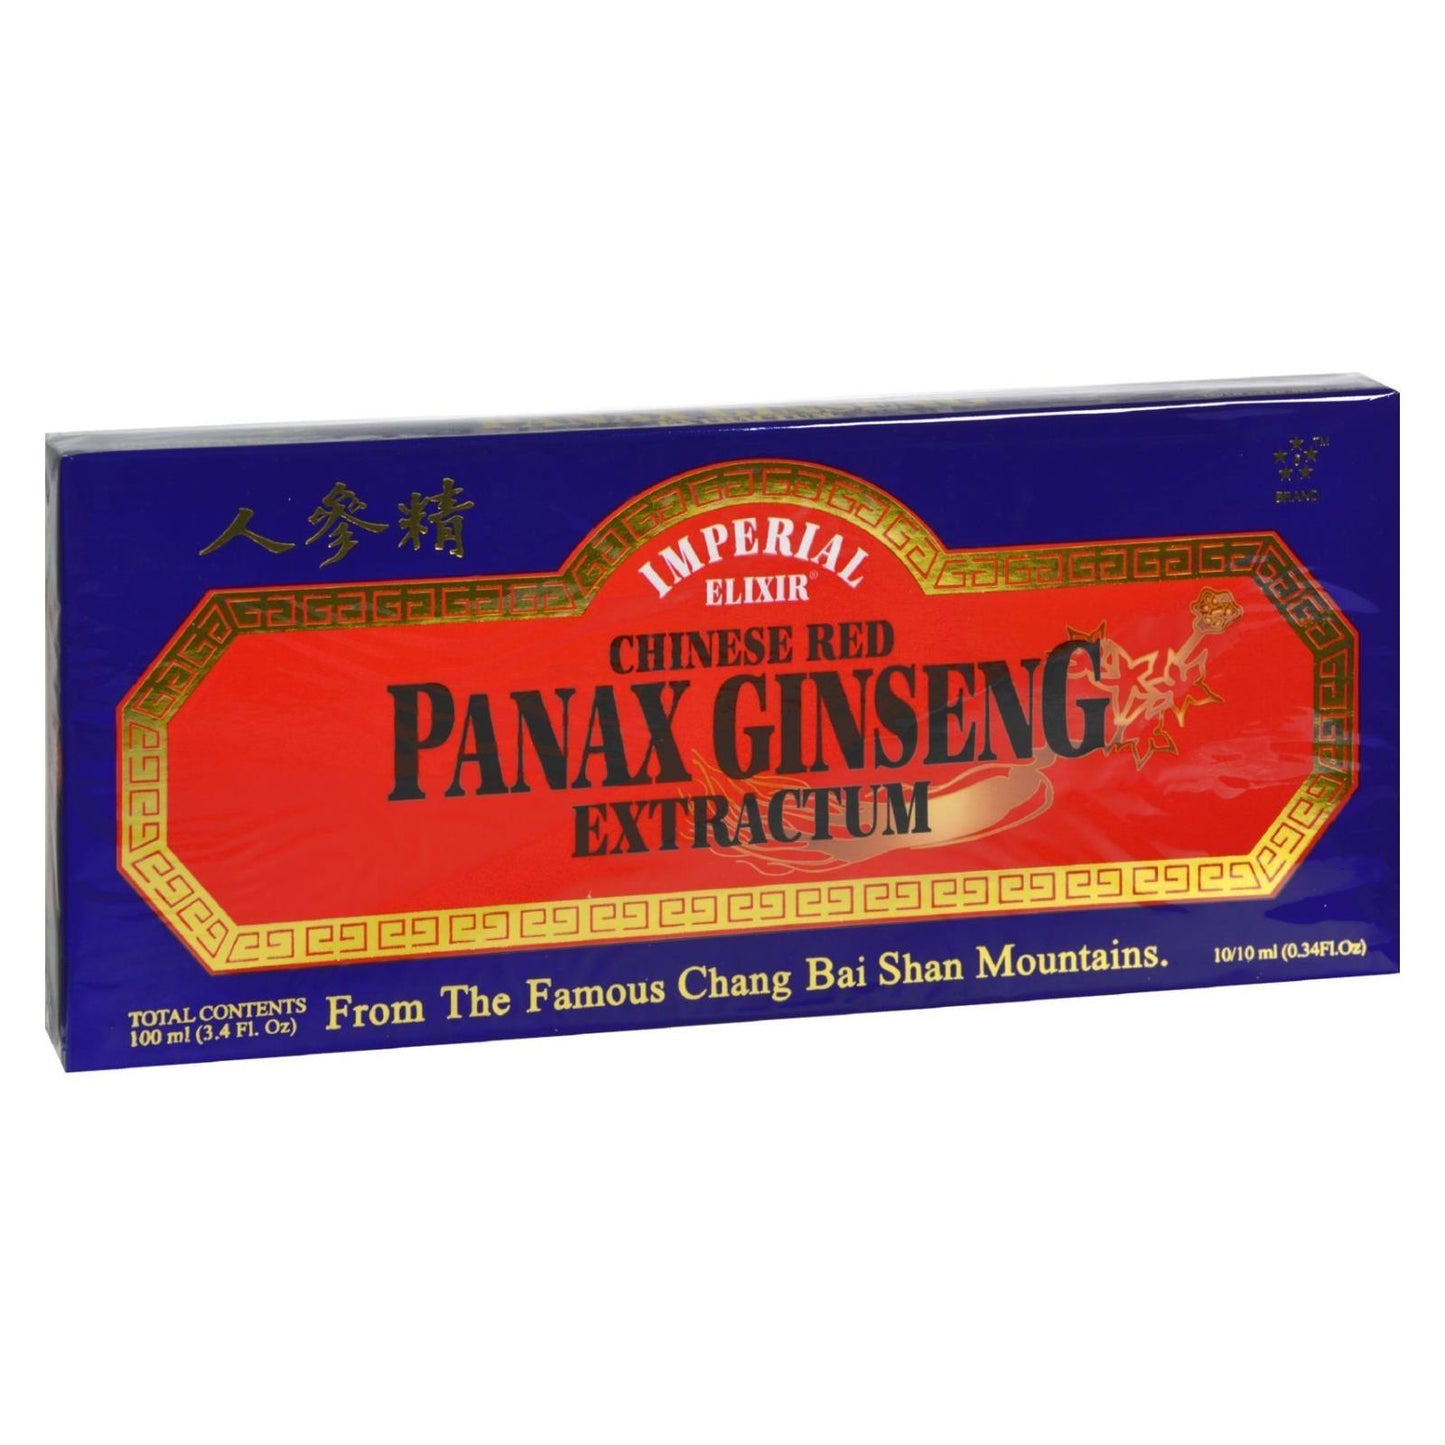 Imperial Elixir Chinese Red Panax Ginseng Extractum - 10 Bottles - 10 Ml Each - Loomini